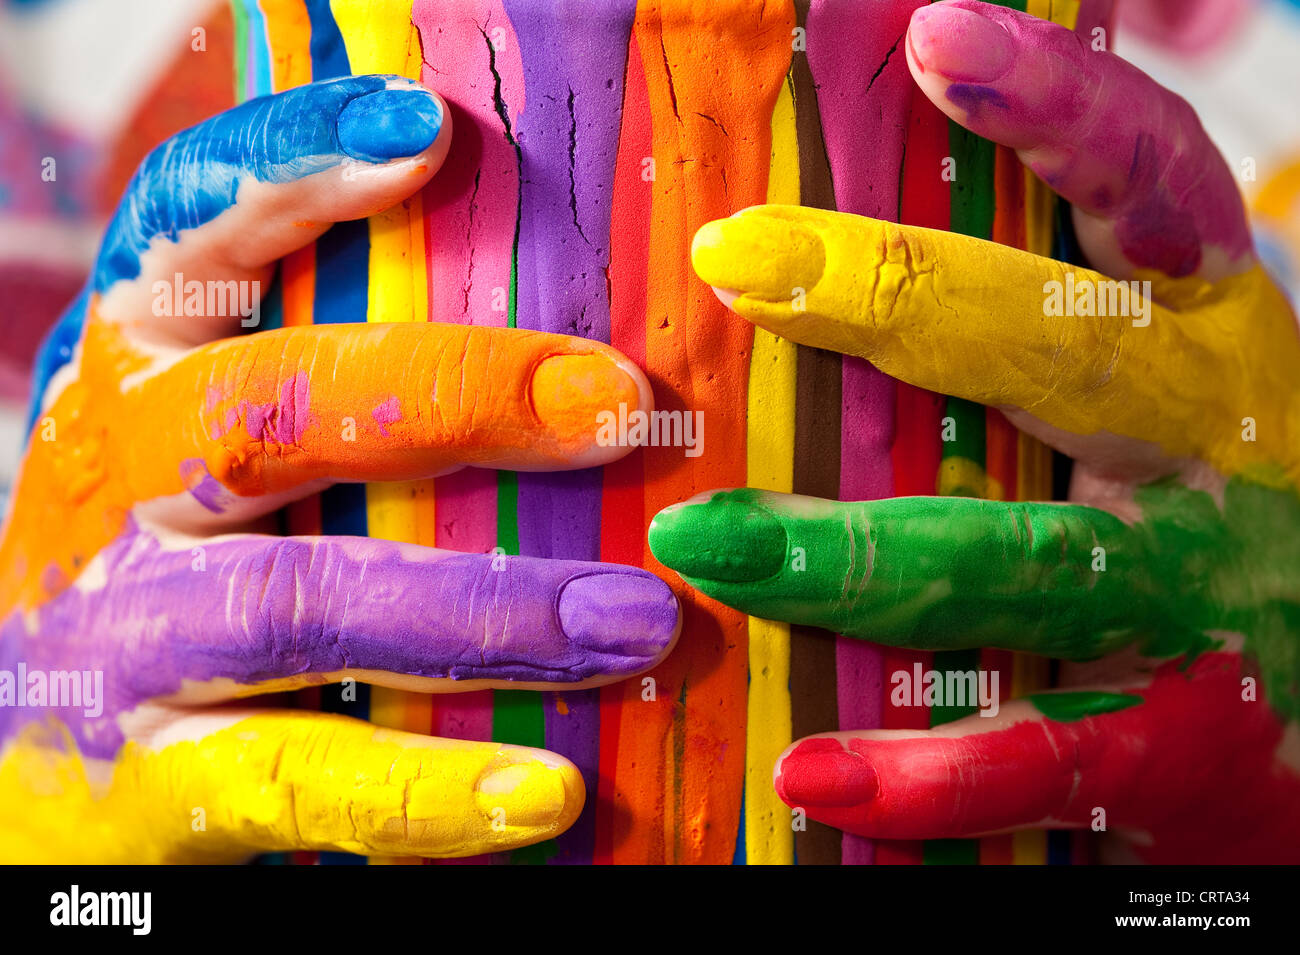 Close-up of woman holding multicolored paint can with painted fingers Stock Photo